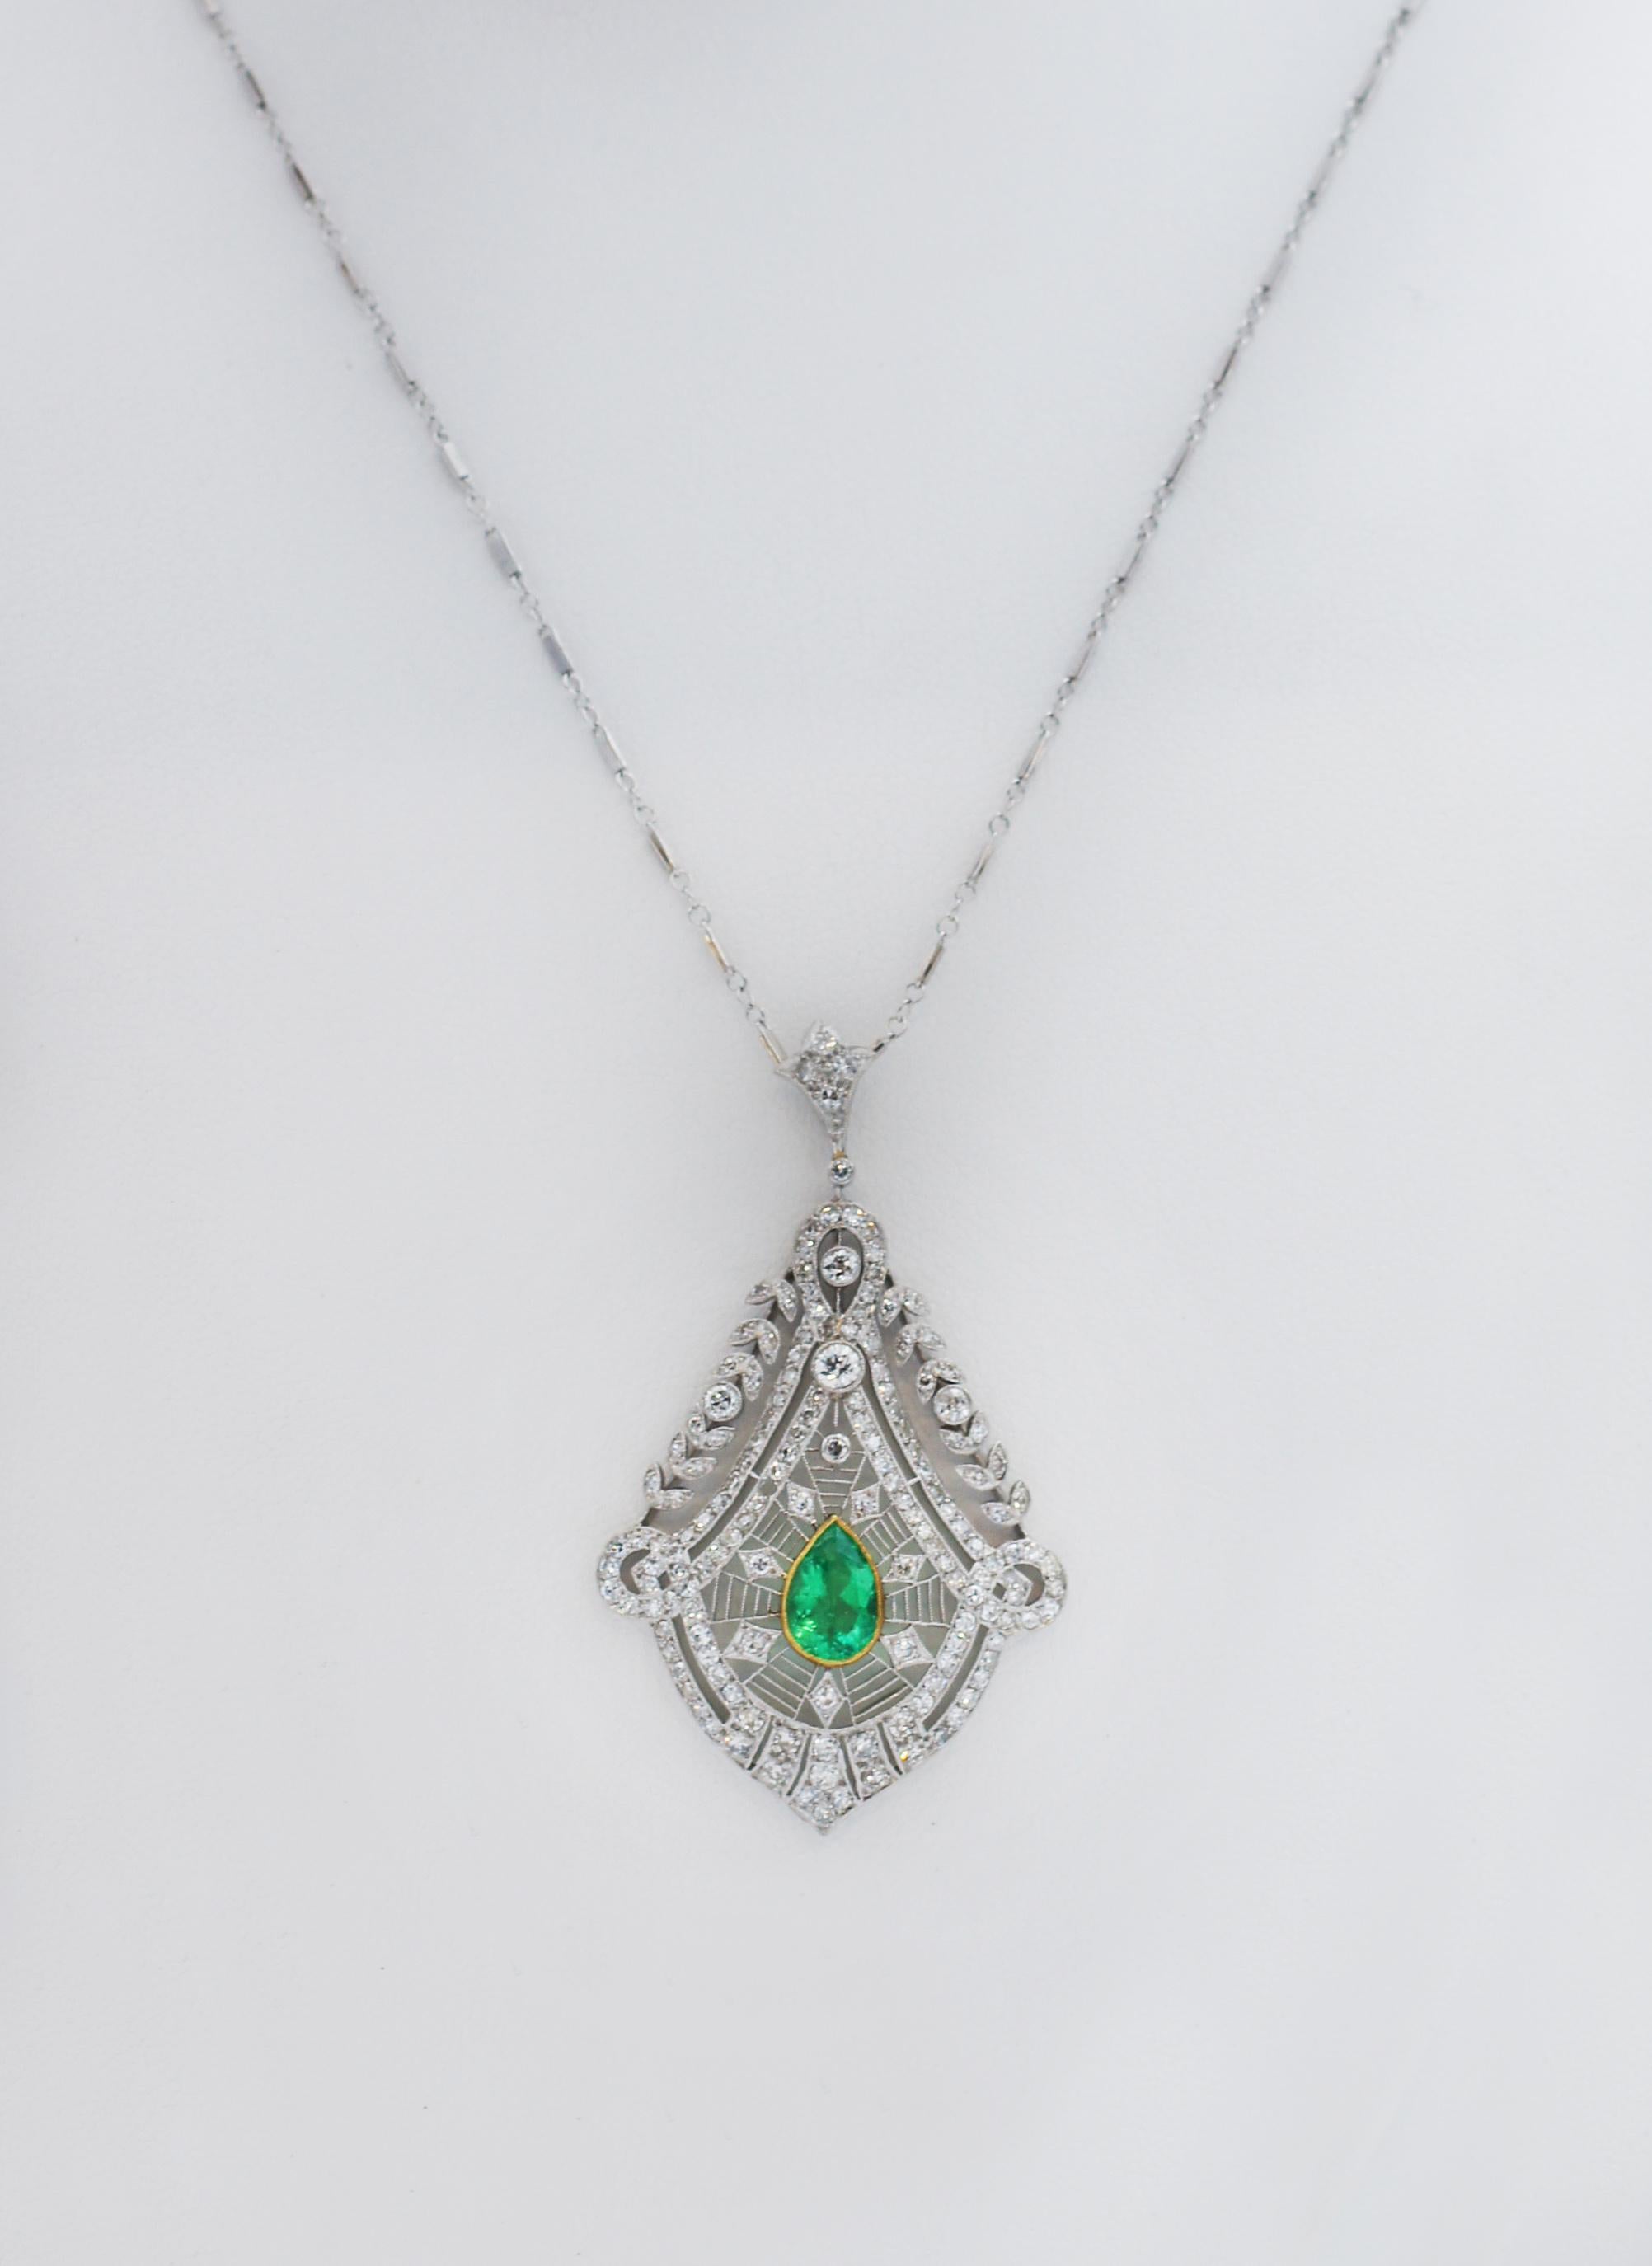 Absolutely Beautiful Set
Art Deco
Filigree Design
Made in Platinum
with diamonds through setting
Necklace features a beautiful Chandelier like Pendant with pave diamonds and pear cut emerald
Pendant Emerald approx. 2 carats (10mm x 7mm)
Chain 22